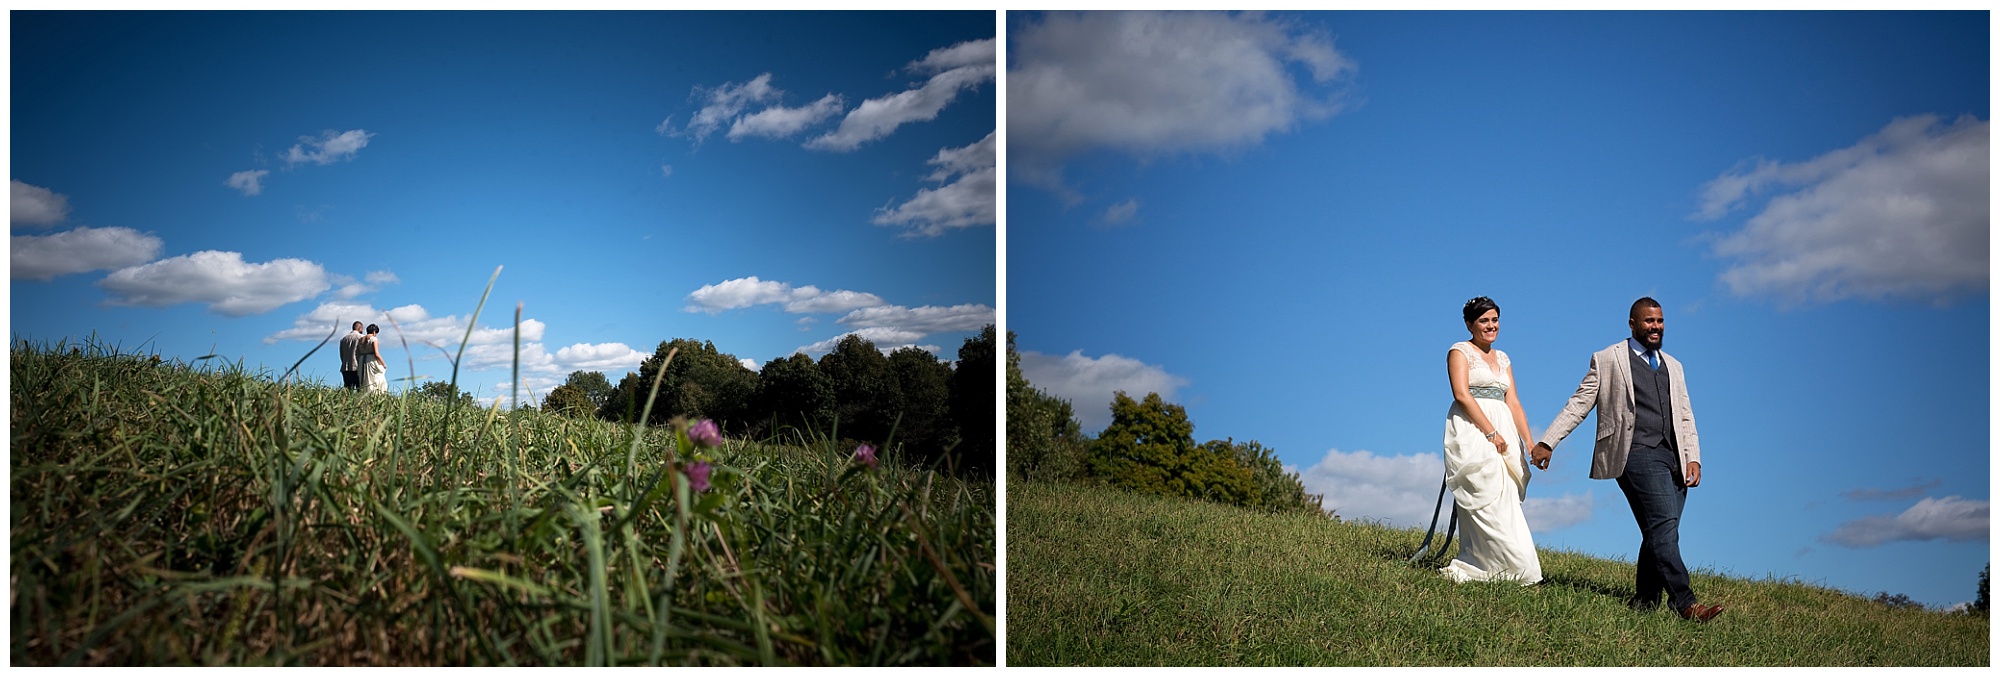 two photos of a bride and groom walking hand in hand on a grassy hill with blue skies in the background